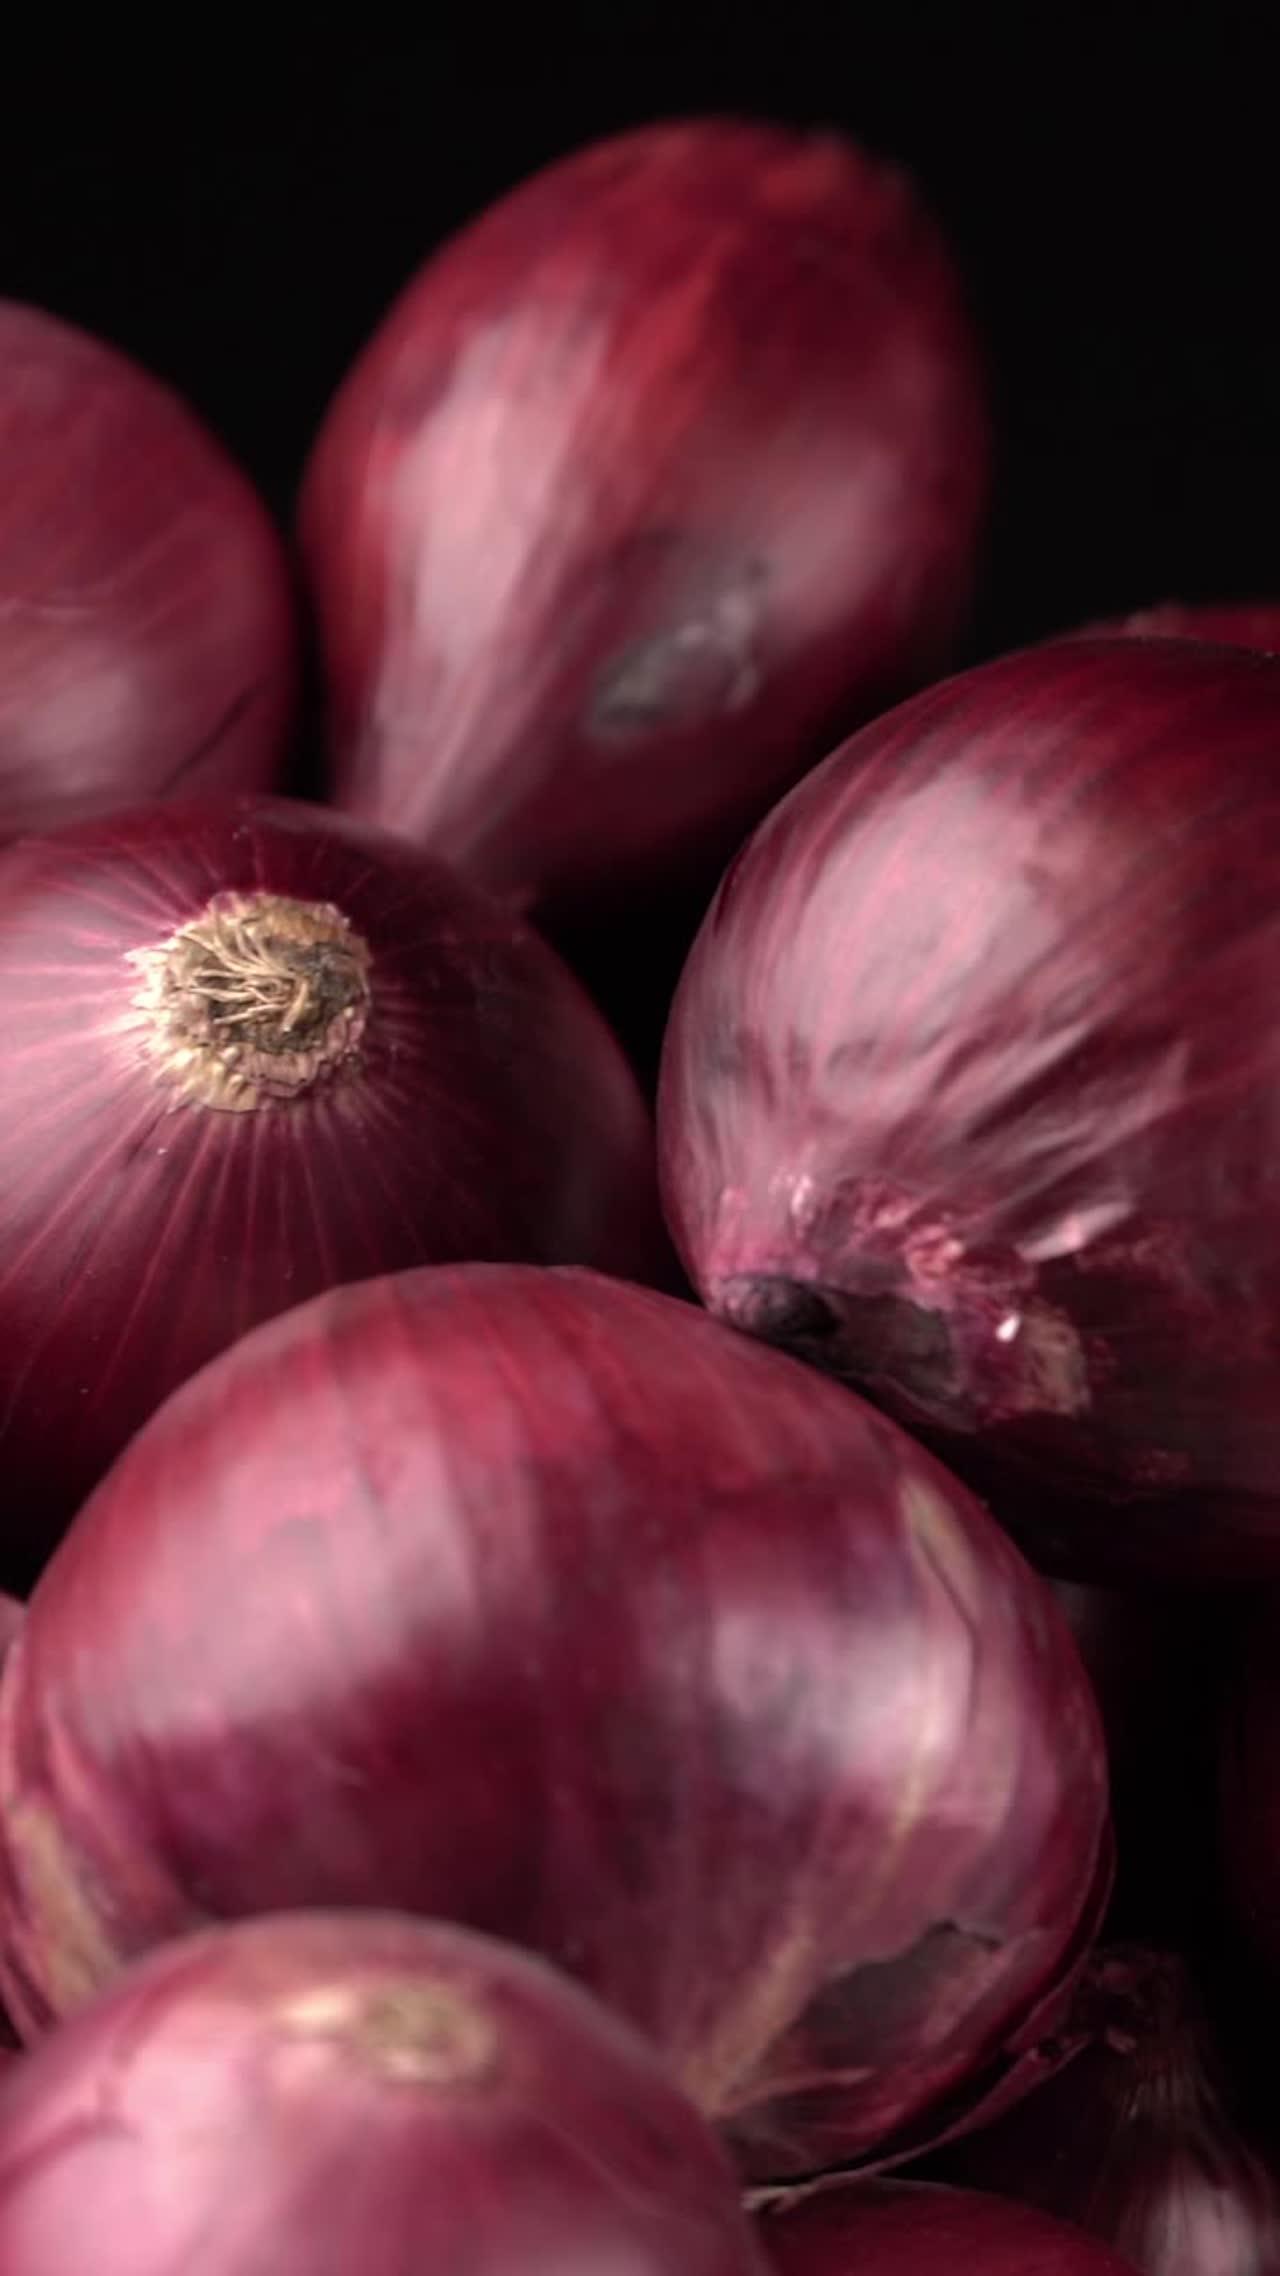 Health Benefits Of Onion For Hair, Skin & Body